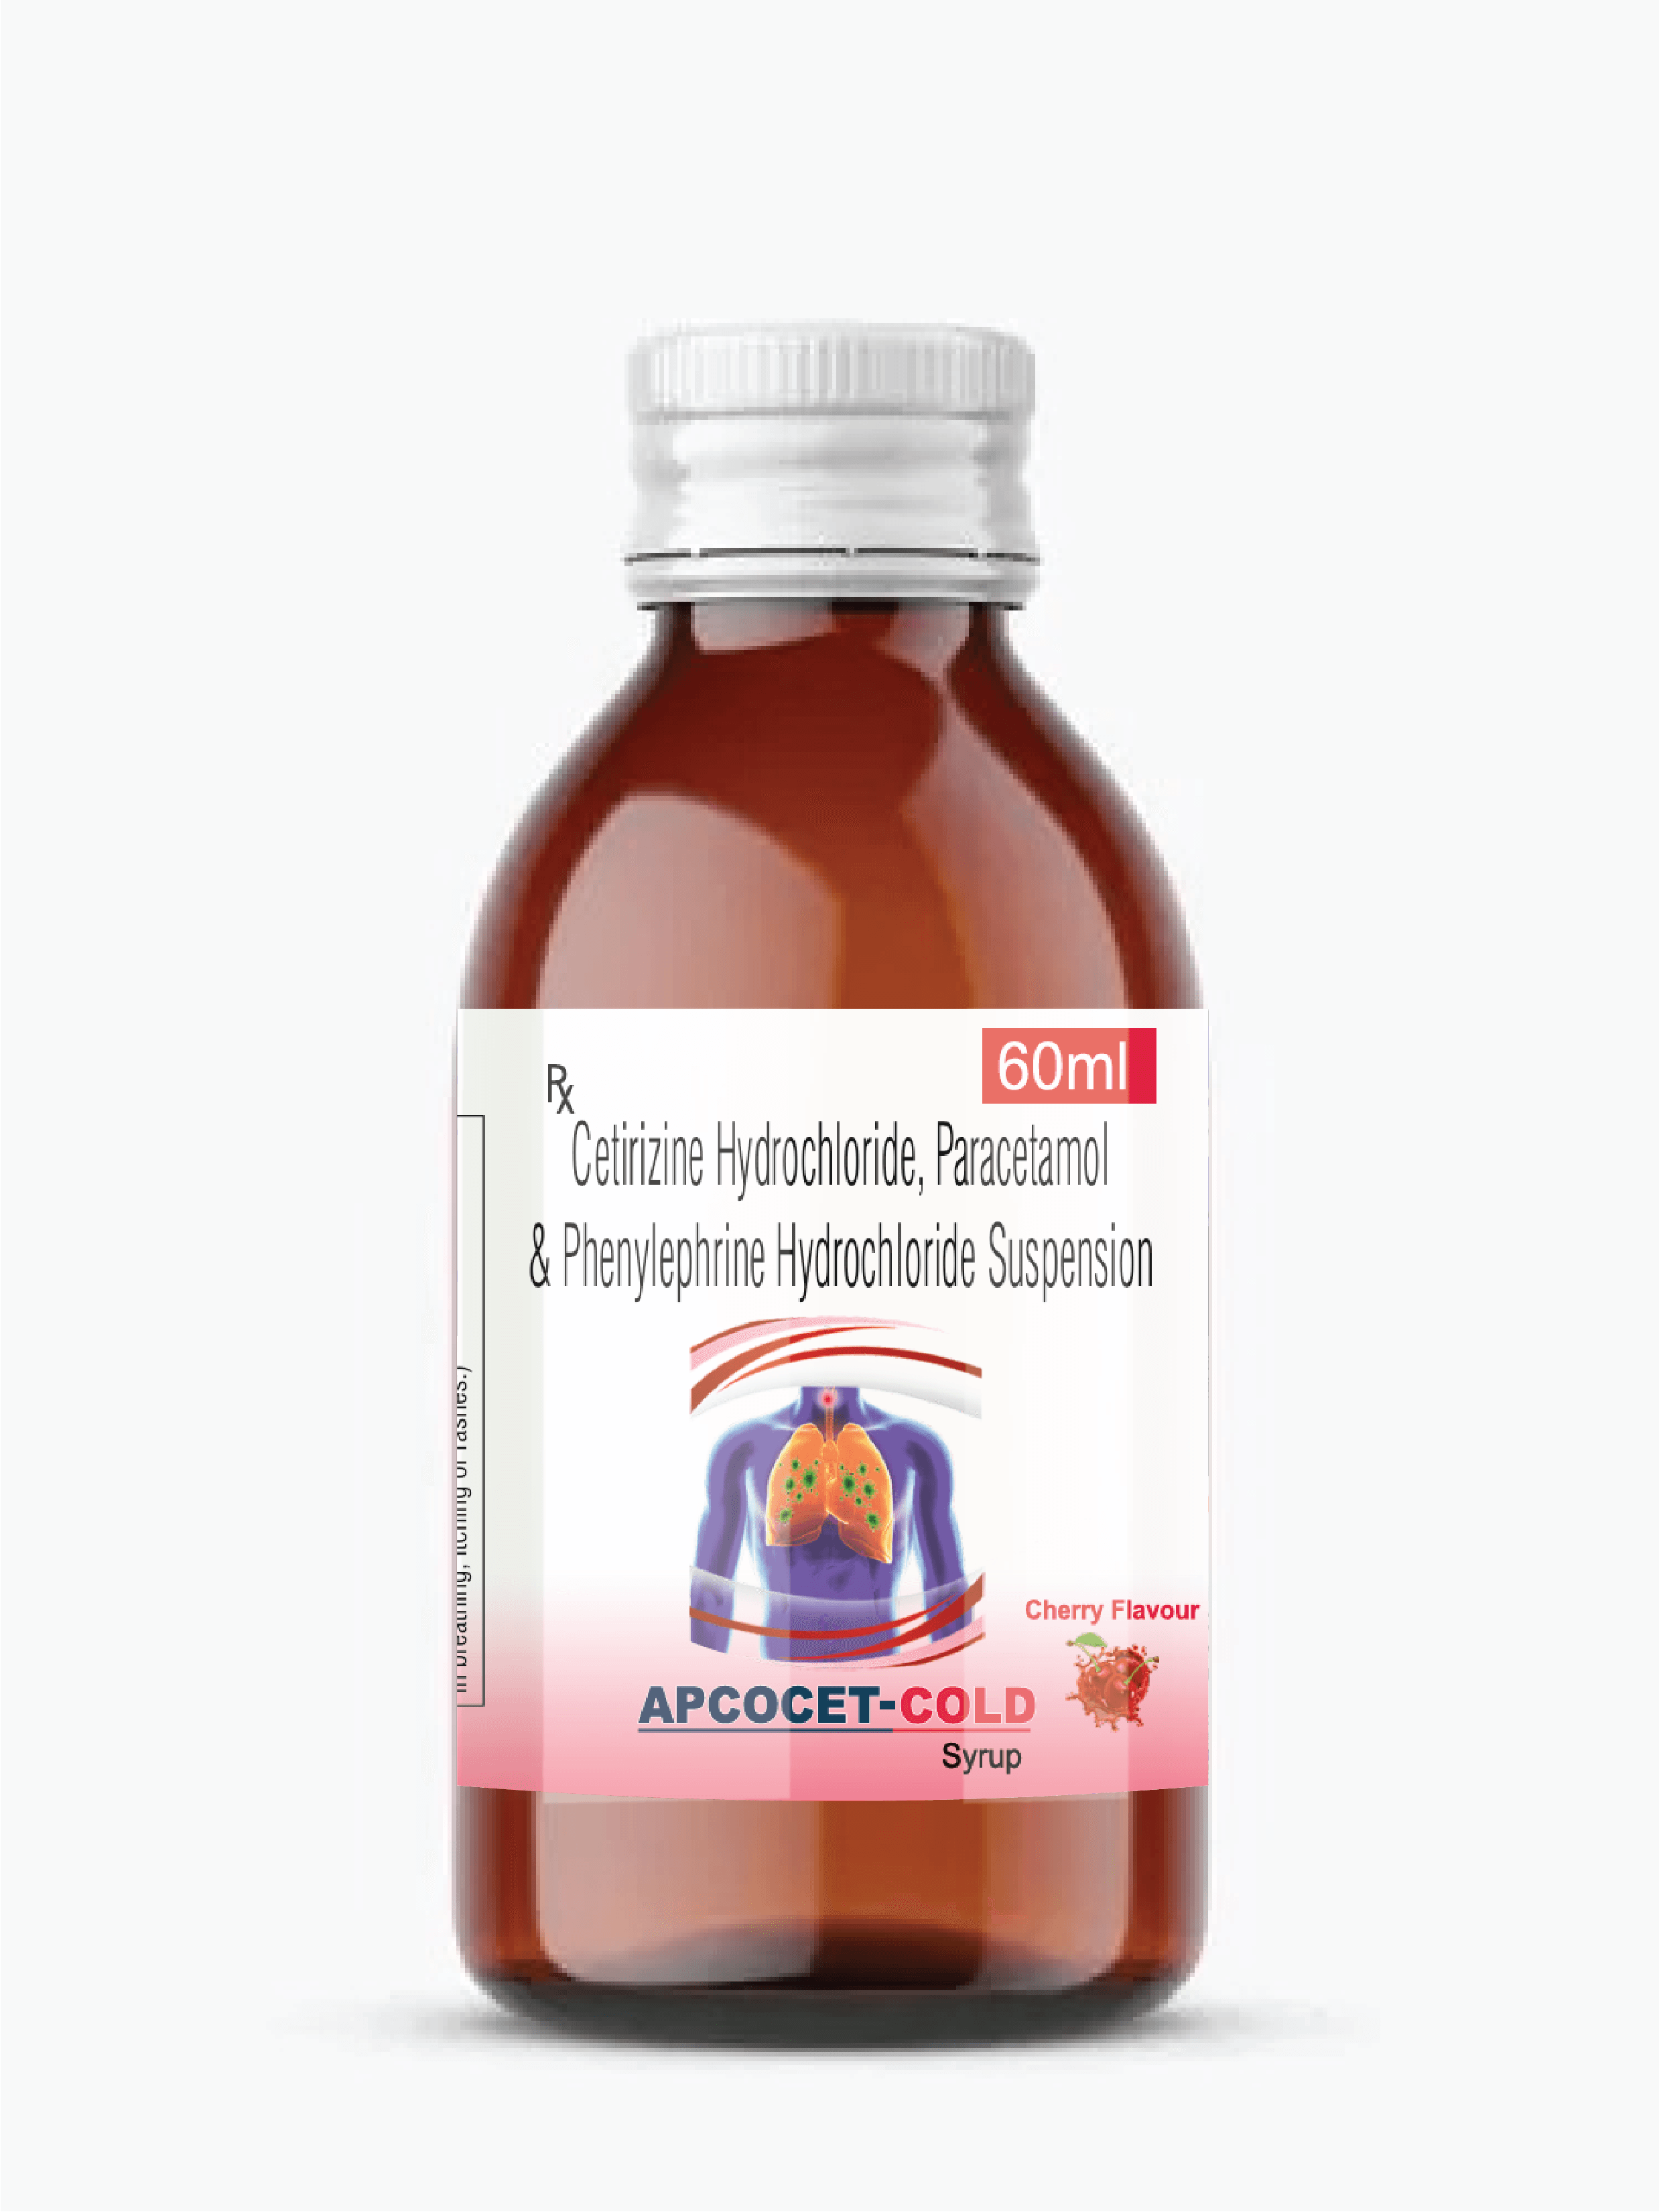 Apcocet-cold (syrup) image